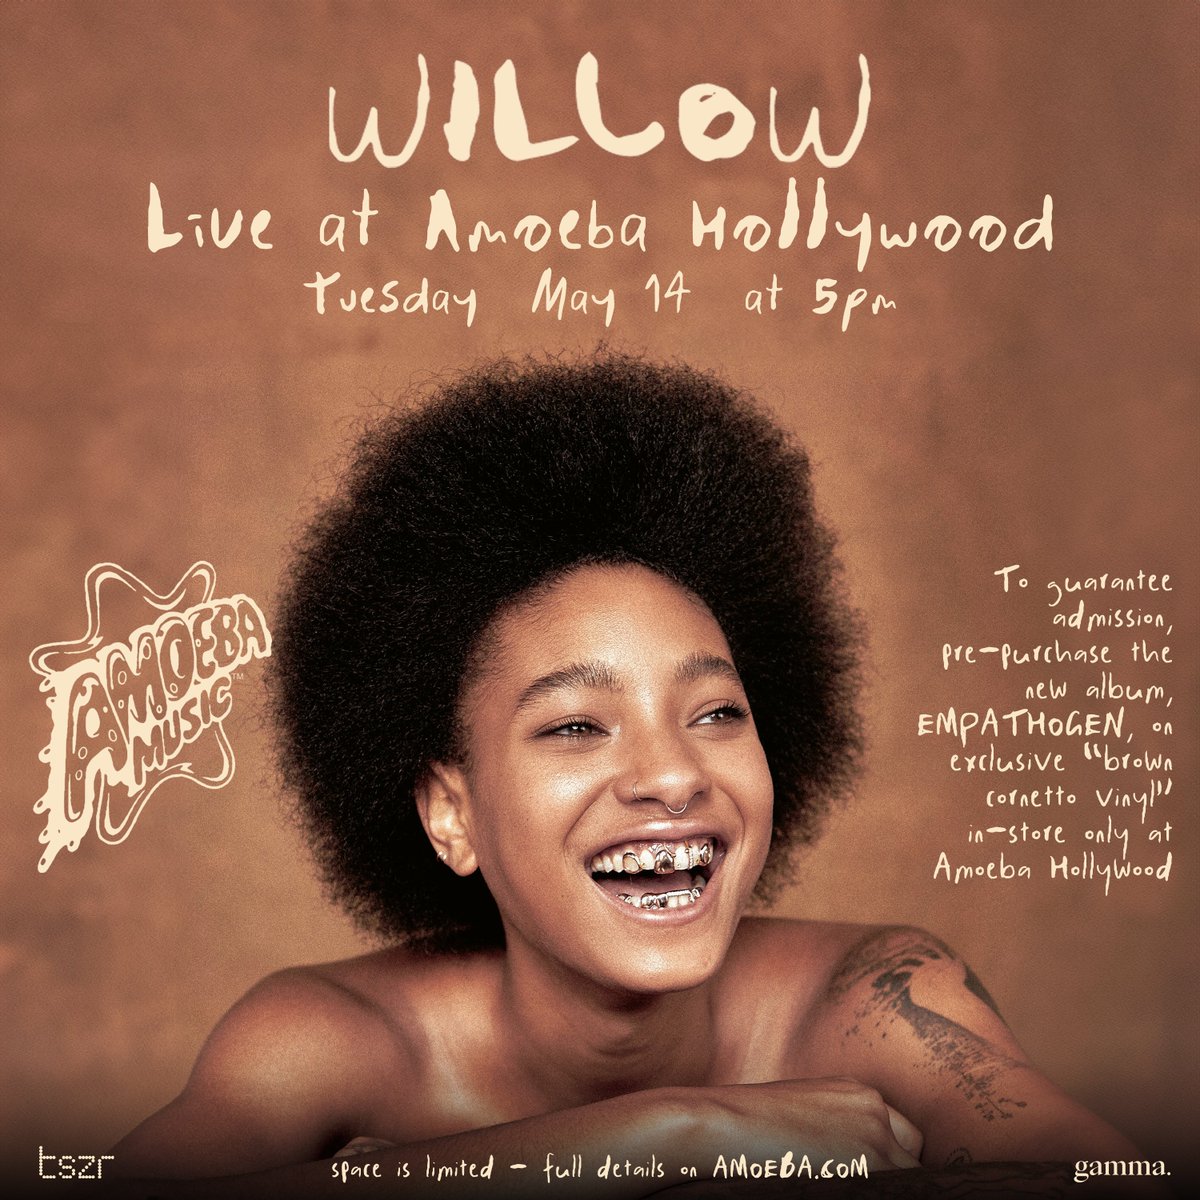 Willow will be doing a special performance at Amoeba Hollywood on May 14! 🔗: amoeba.com/live-shows/upc…